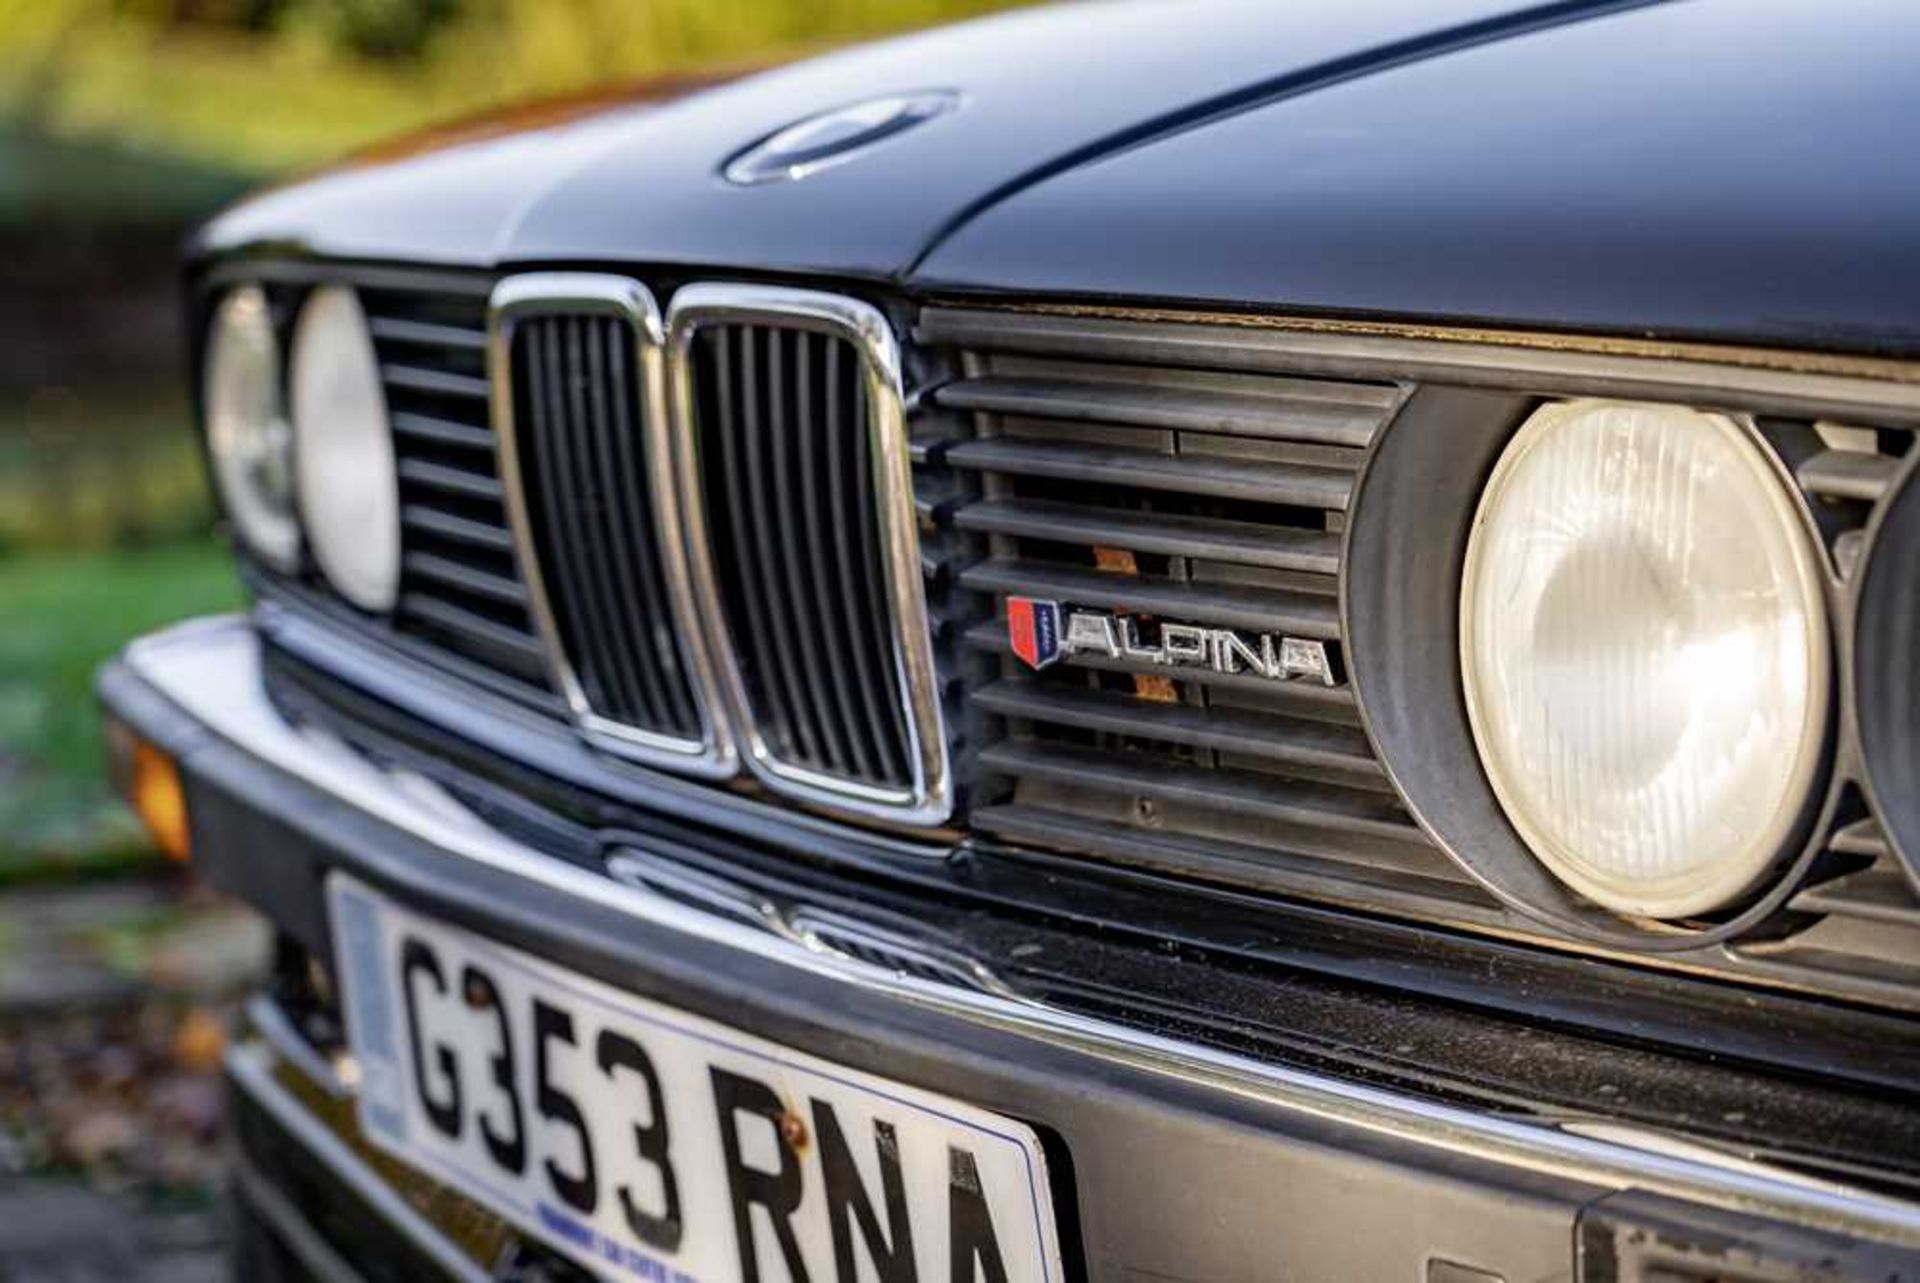 1989 BMW 320i Convertible Converted to Alpina 328i Specification - Image 19 of 51